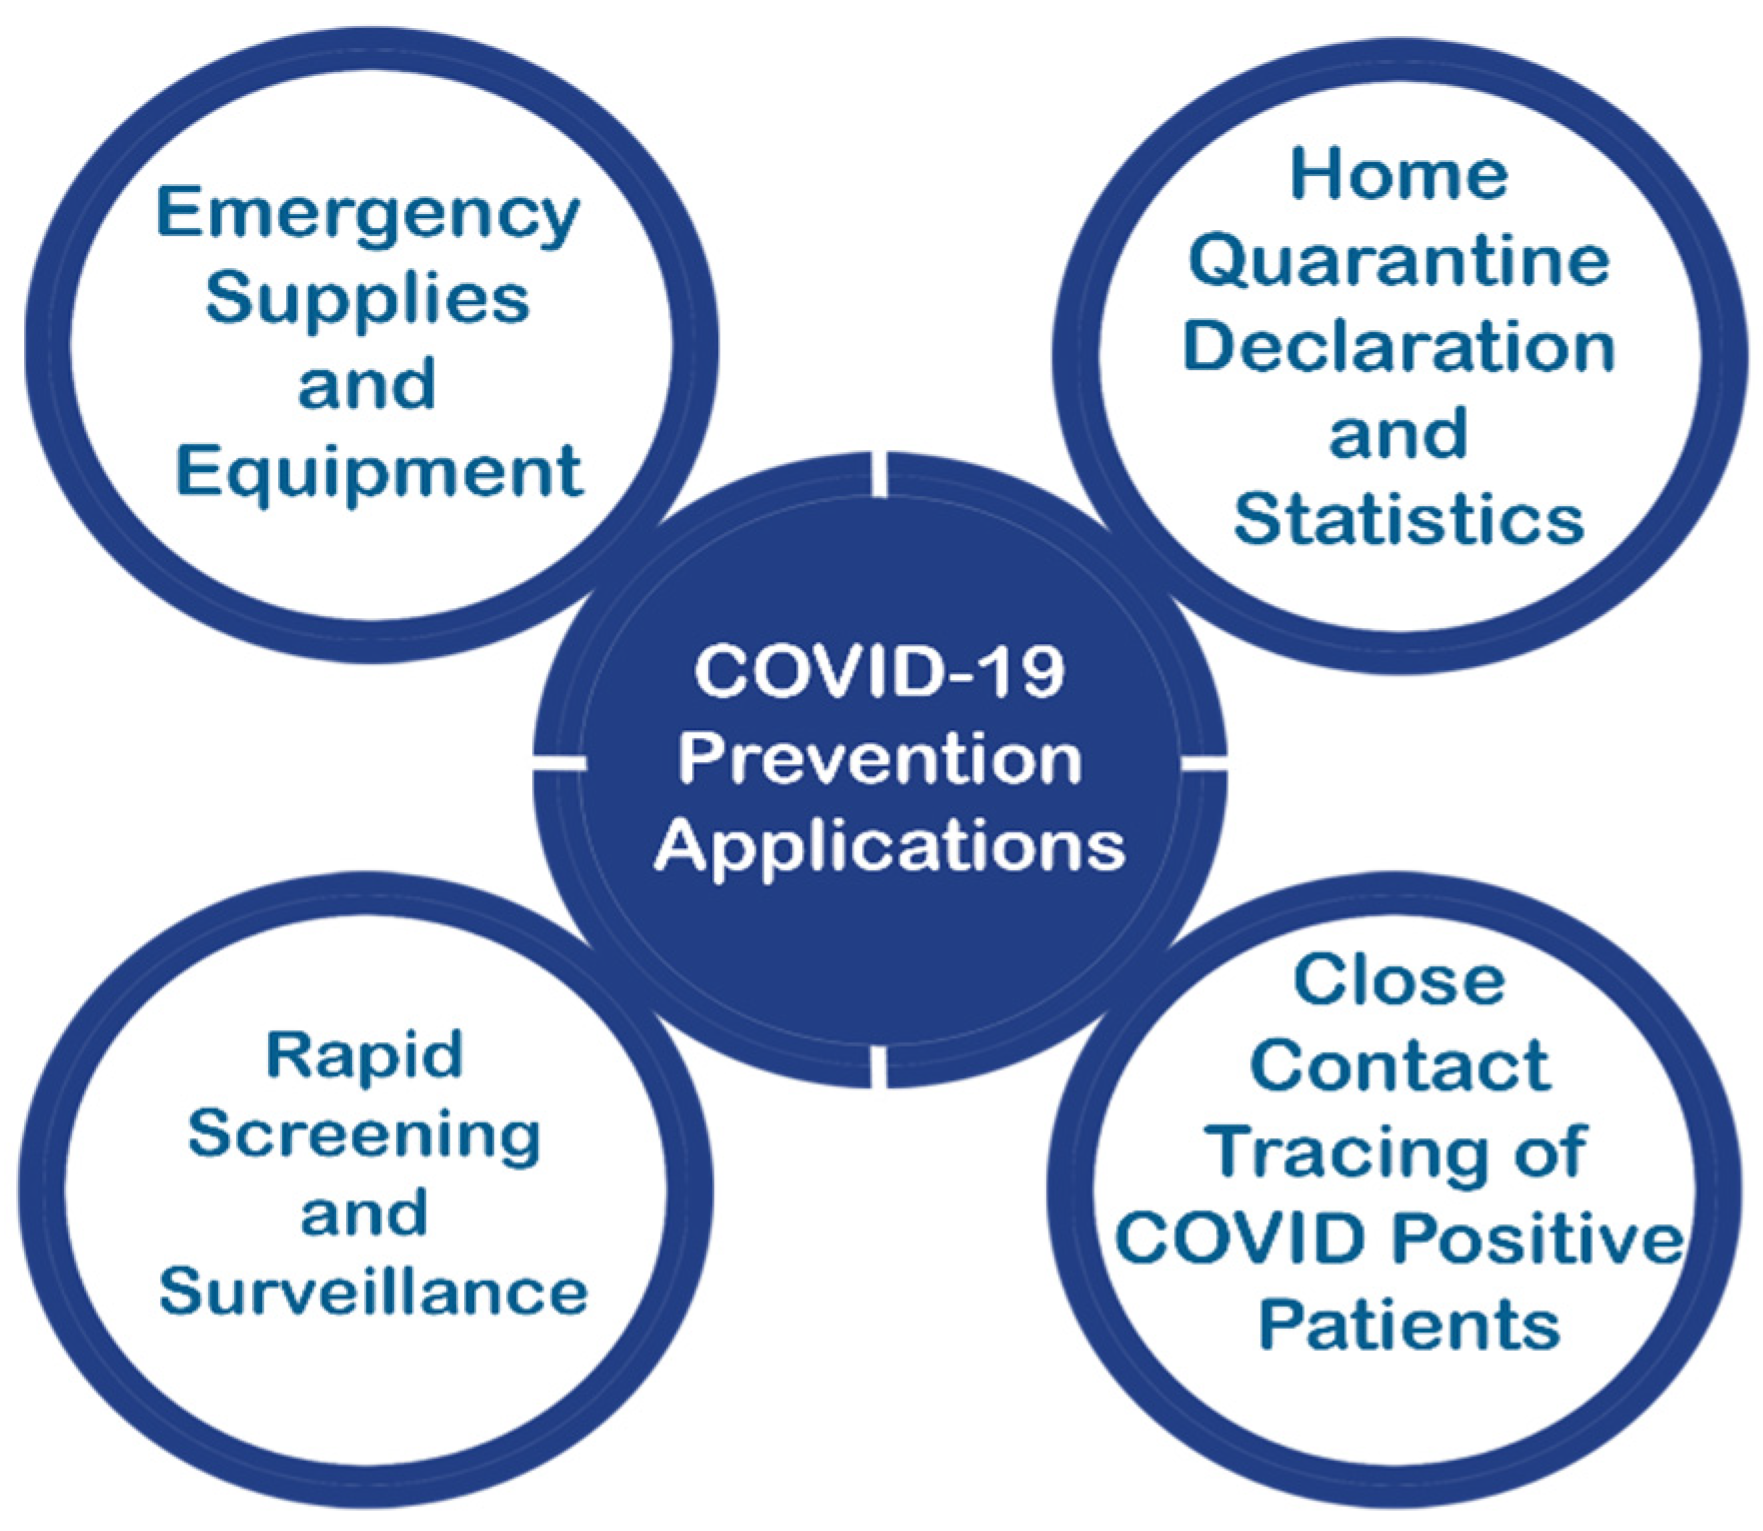 Resolutions on COVID-19 prevention abolished